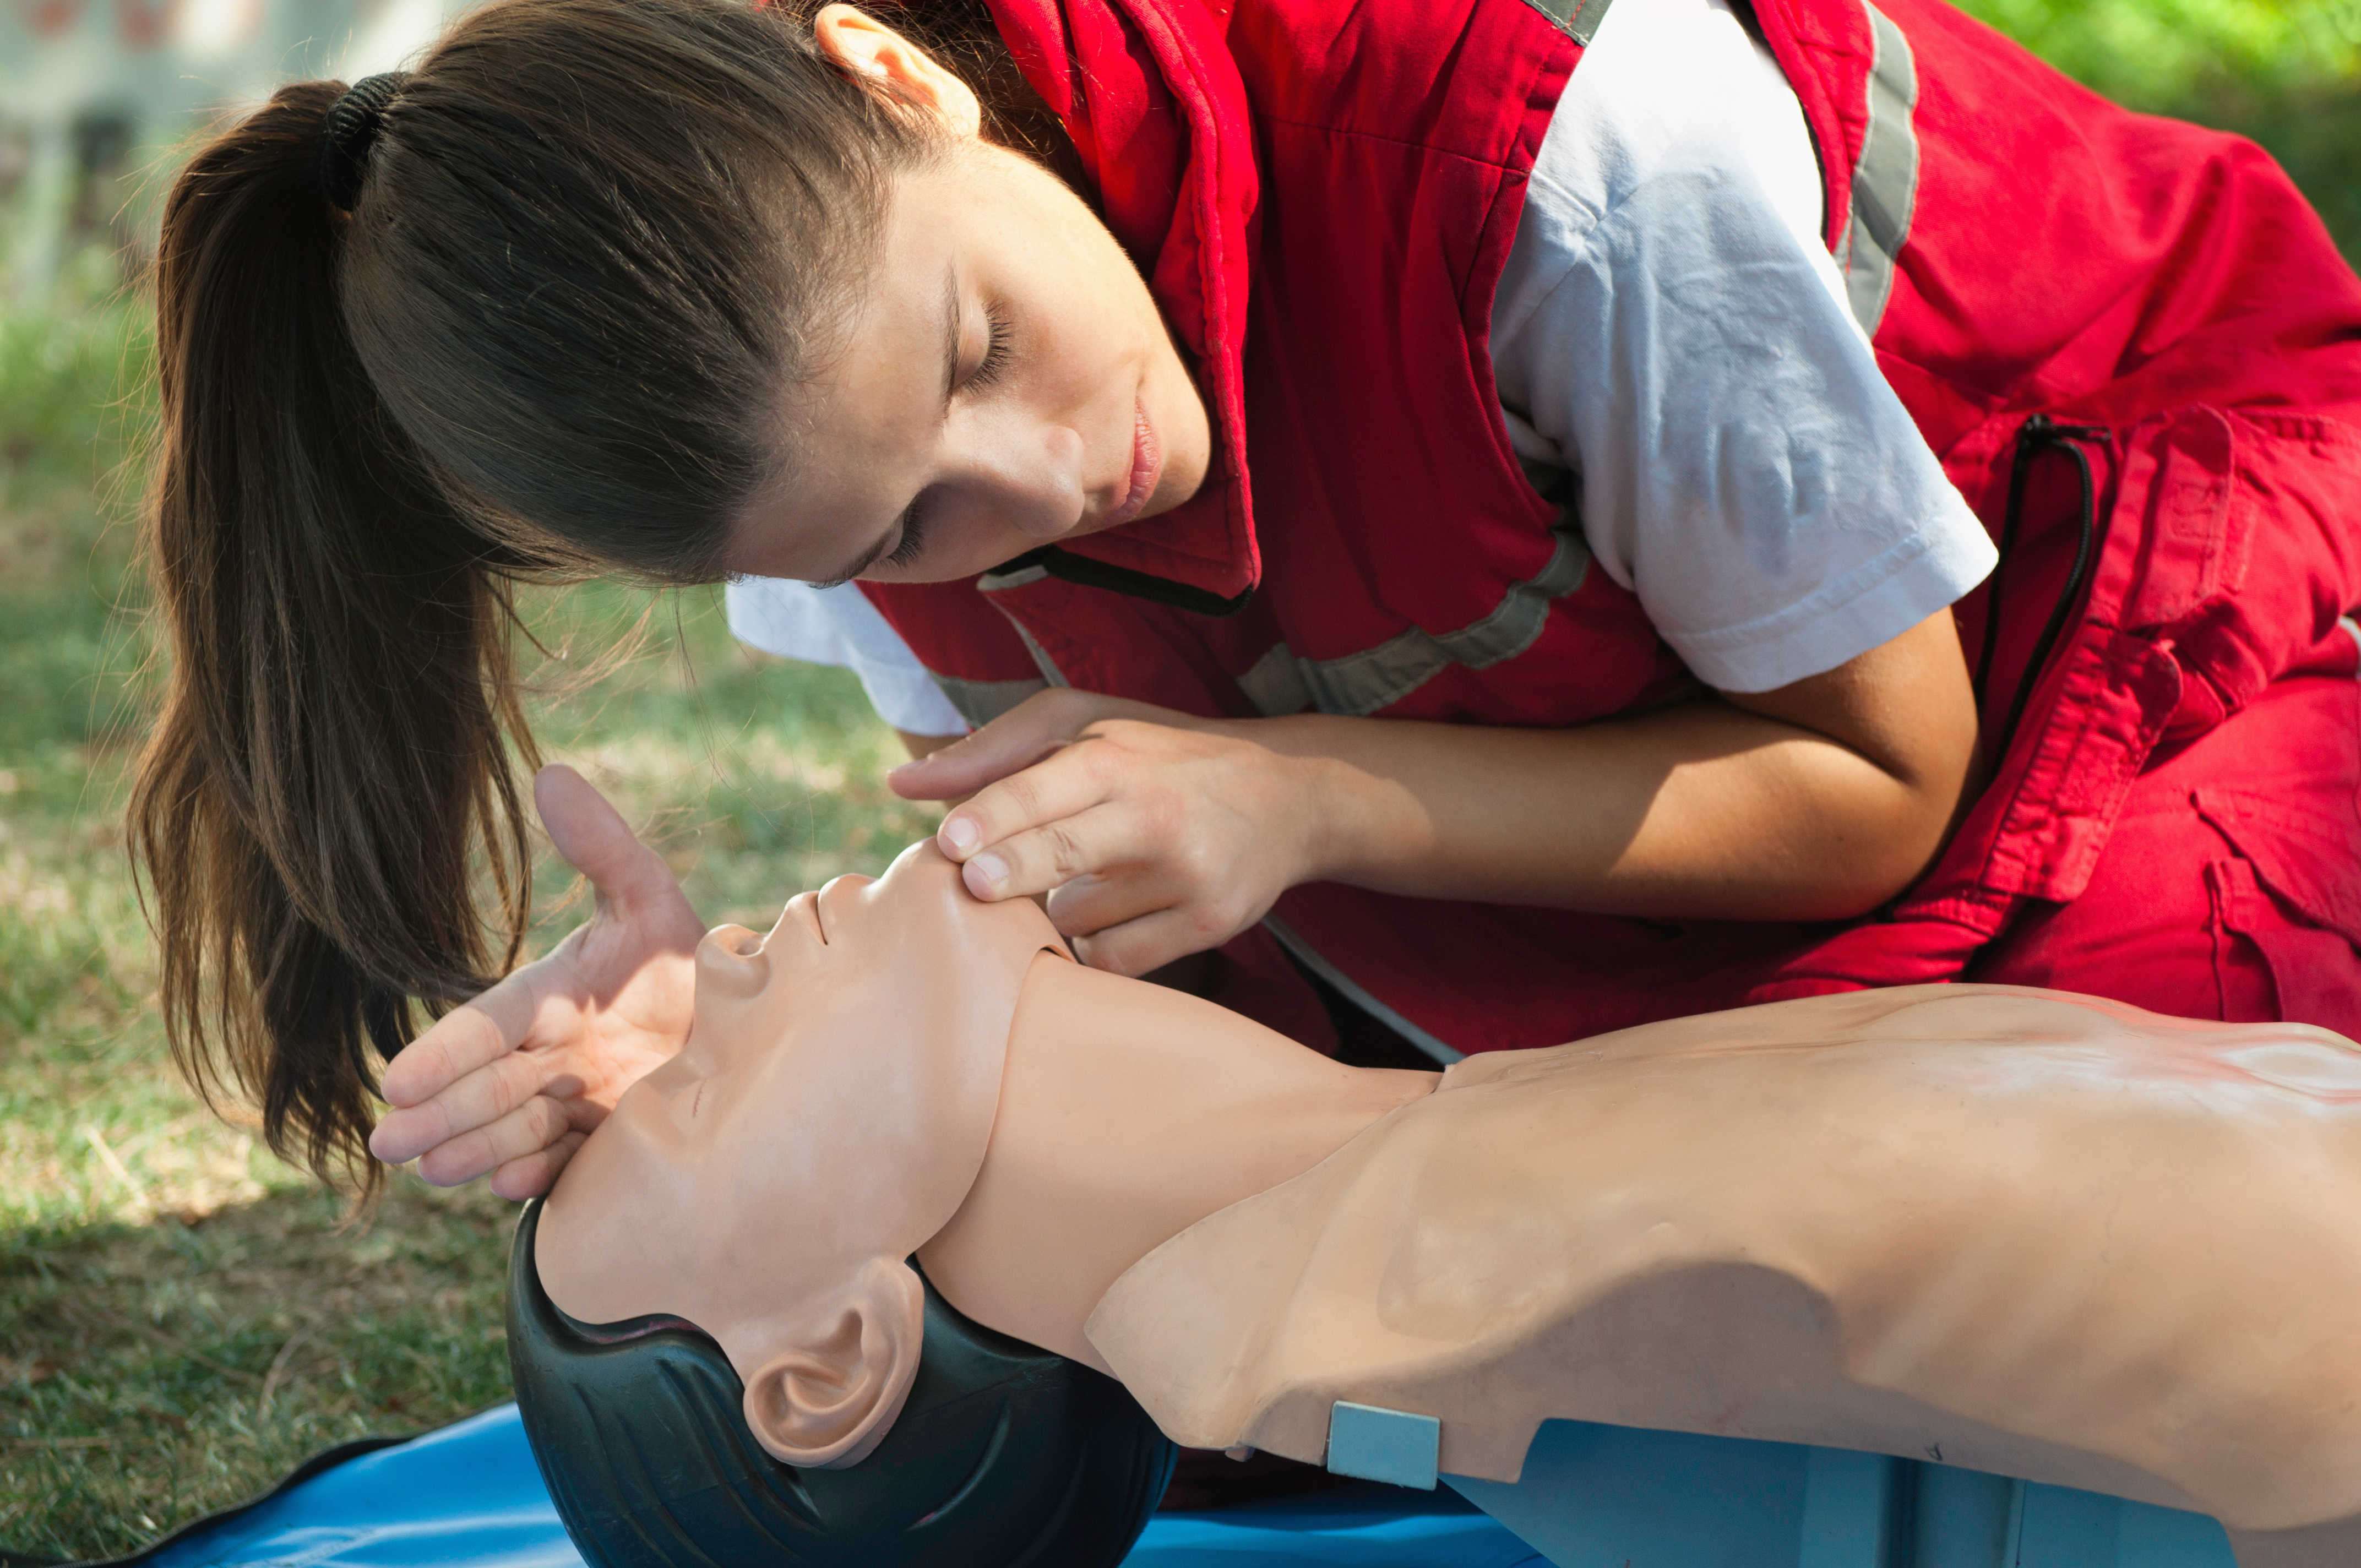 CPR AED First Aid Training Class February 11, 2023 in Salem